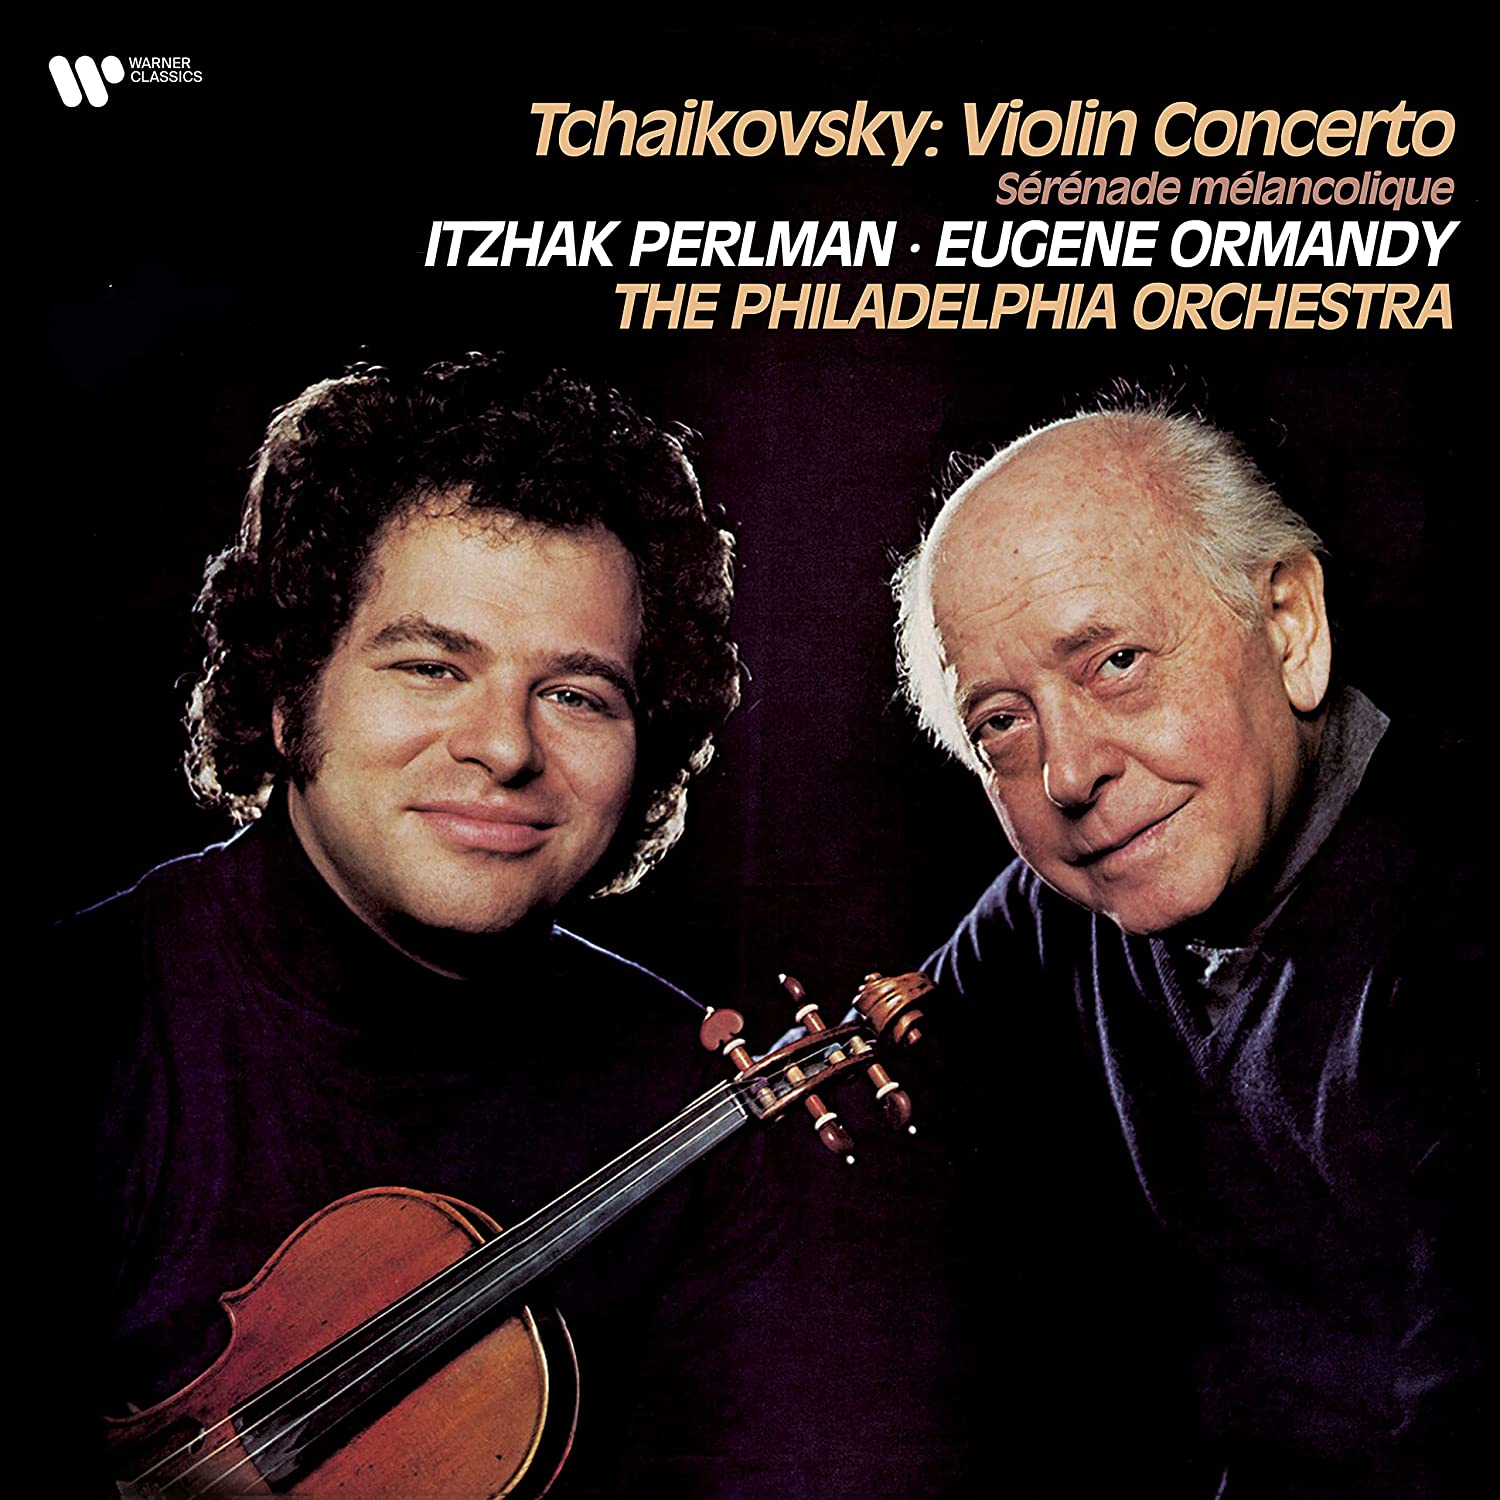 Виниловая Пластинка Itzhak Perlman, Philadelphia Orchestra, Eugene Ormandy, Tchaikovsky: Violin Concerto & Serenade Melancolique (0190296158803) виниловая пластинка david bowie sergei prokofiev eugene ormandy the philadelphia orchestra benjamin britten peter and the wolf young person s guide to the orchestra lp 180 gram